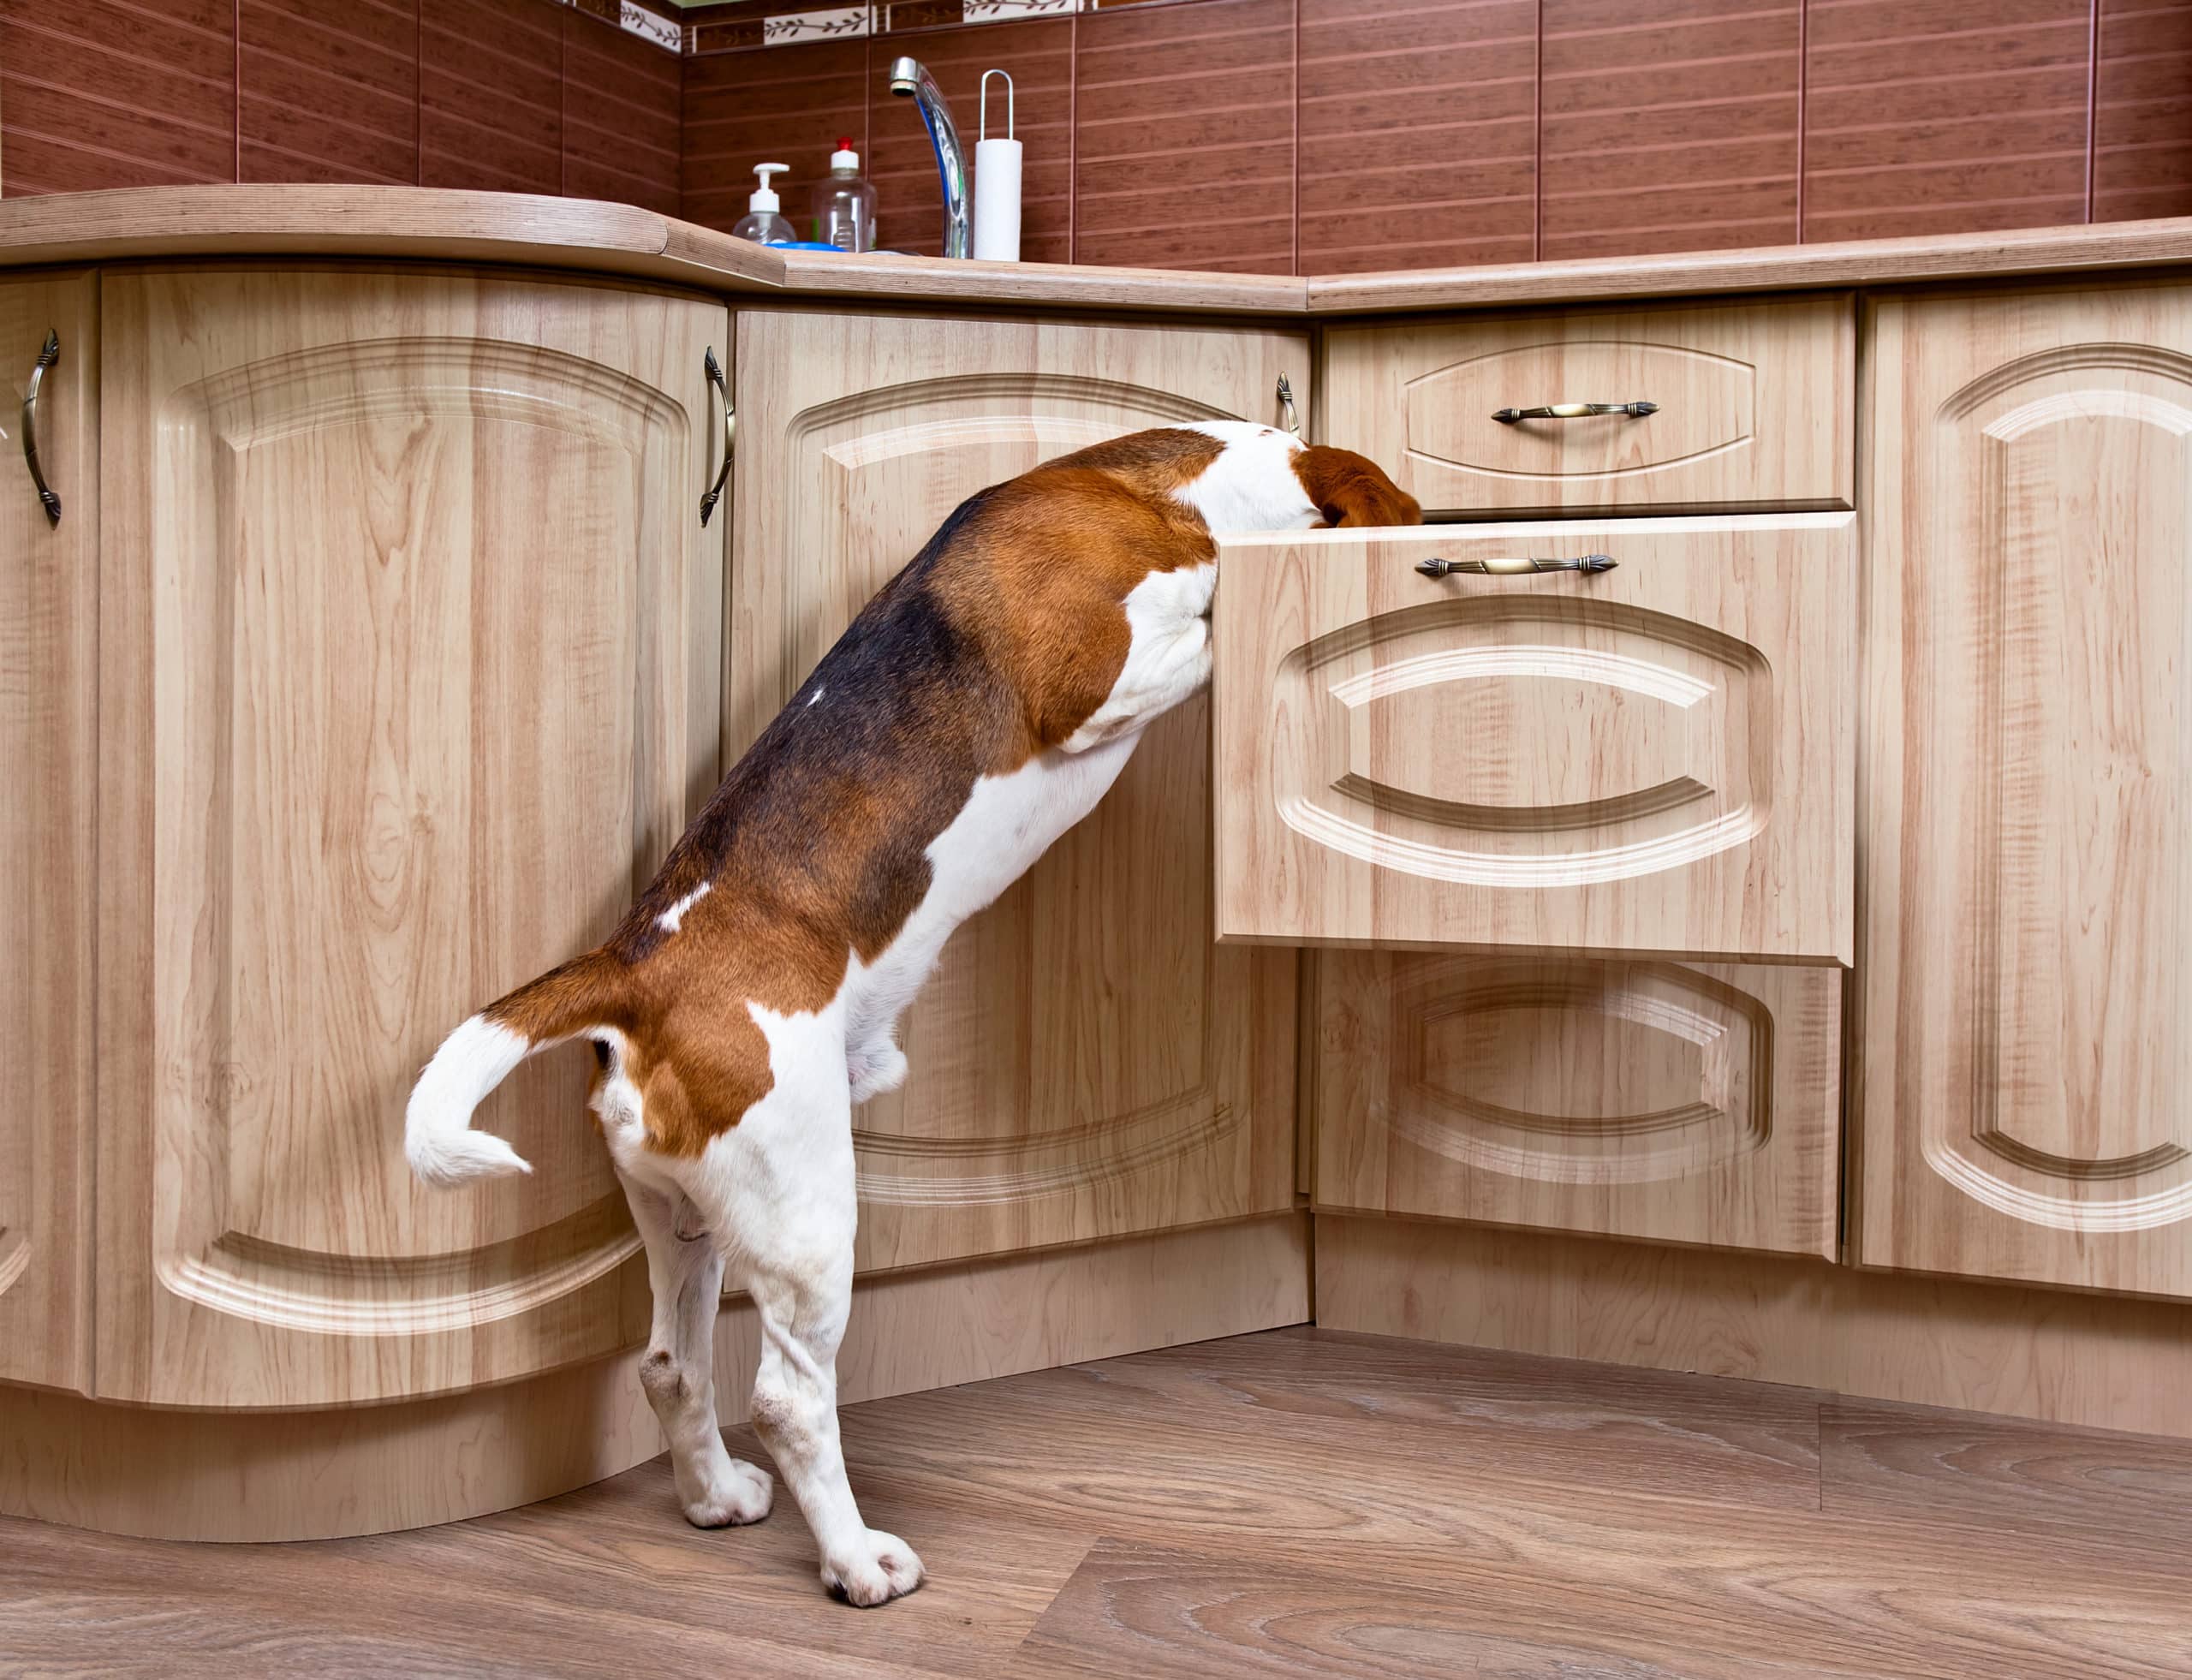 Dog looking in kitchen draw